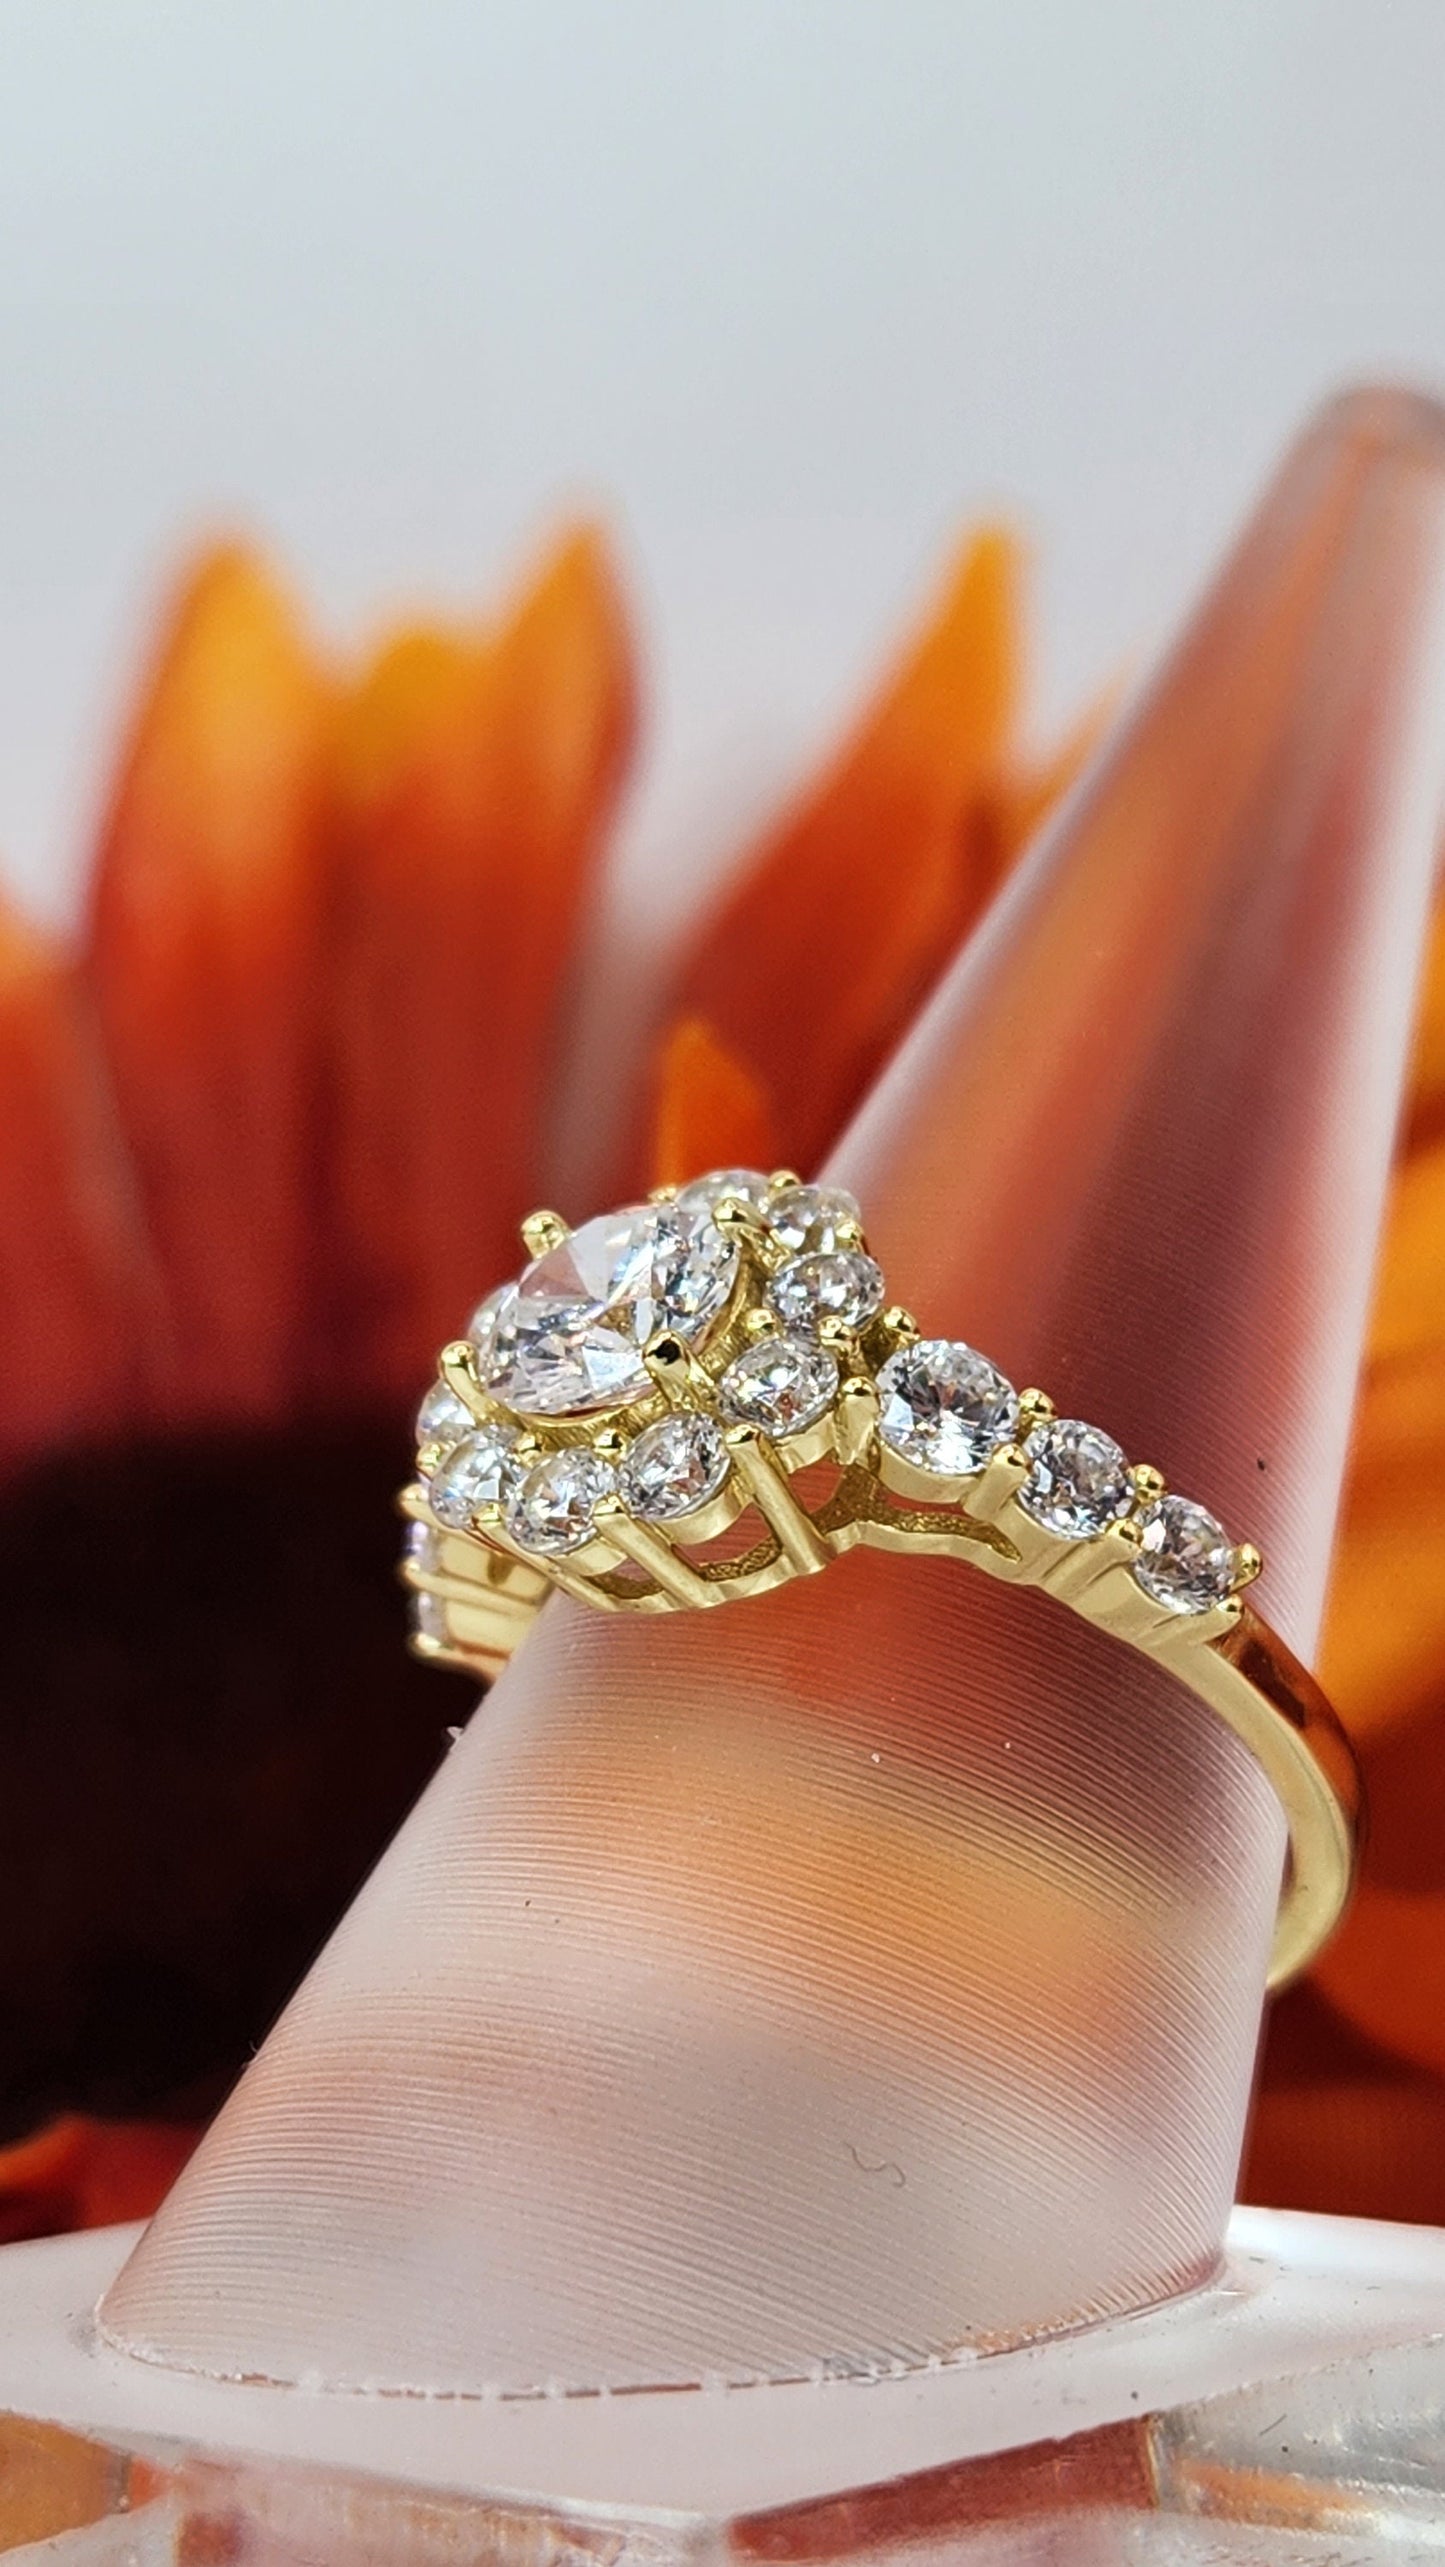 Round Halo CZ Flower Design Ring - Silver with gold plating